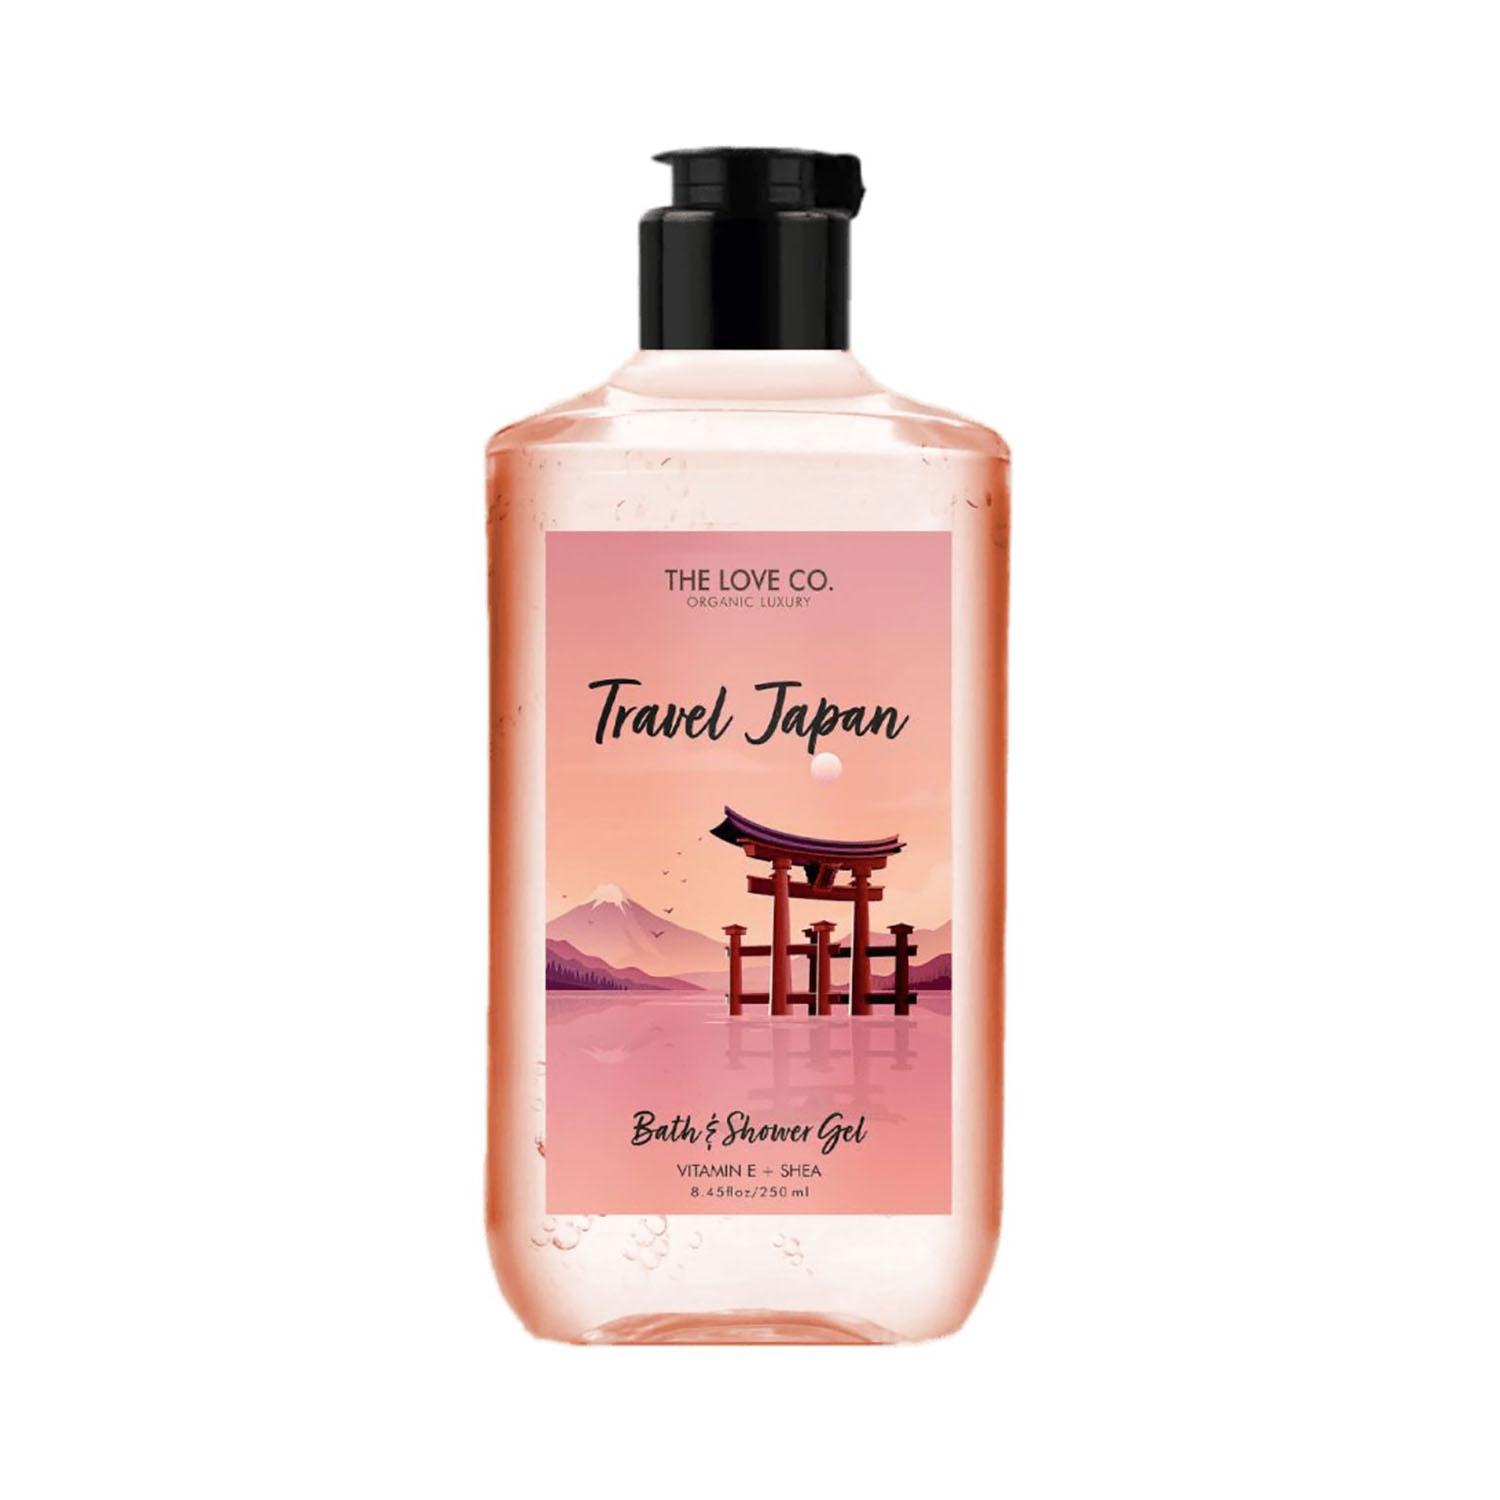 THE LOVE CO. | THE LOVE CO. Travel Japan Body and Shower Gel (250ml)